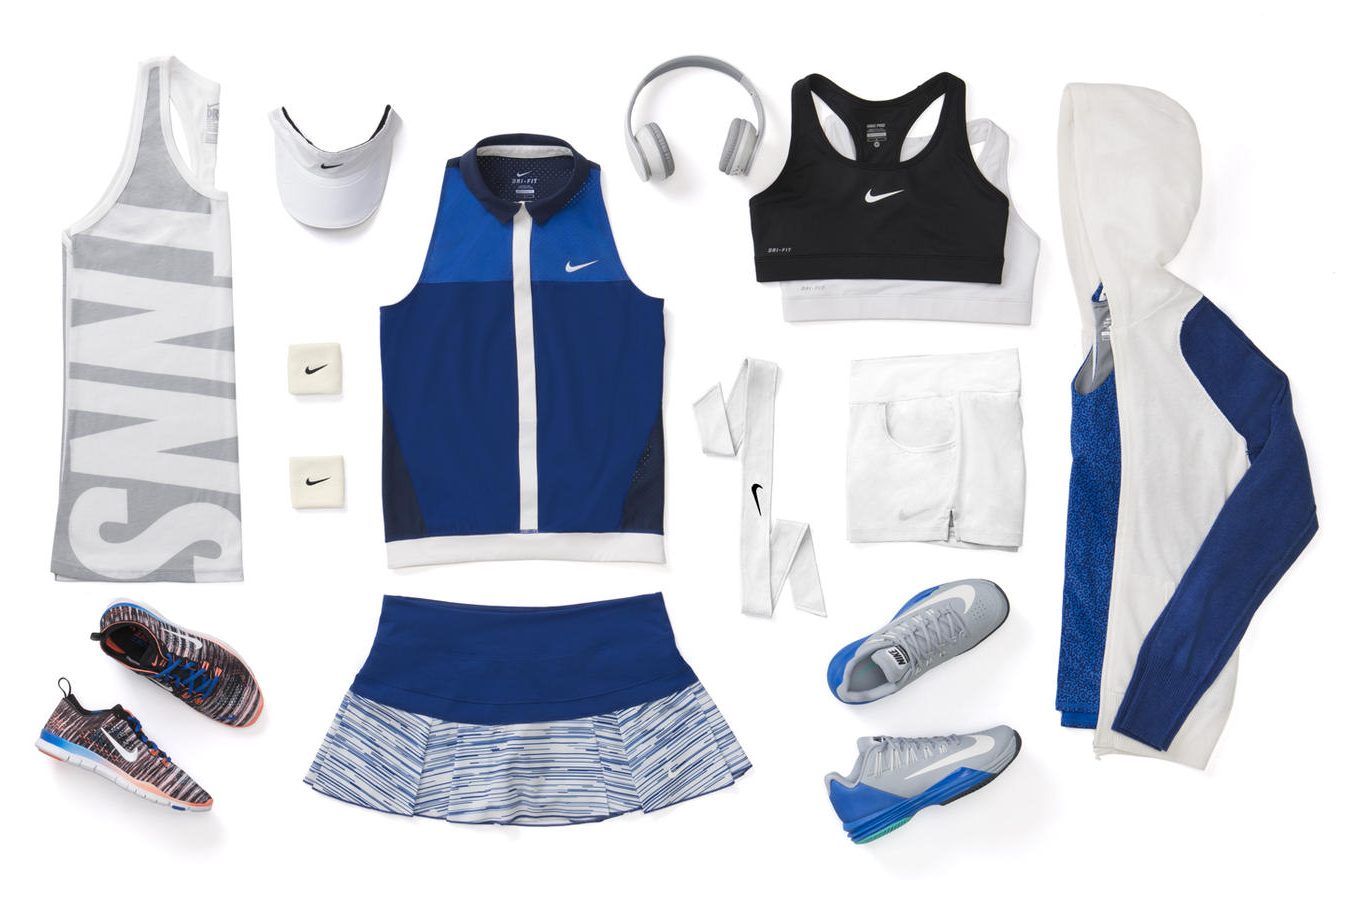 Stand Out in Nike’s New Fall Line for Women!